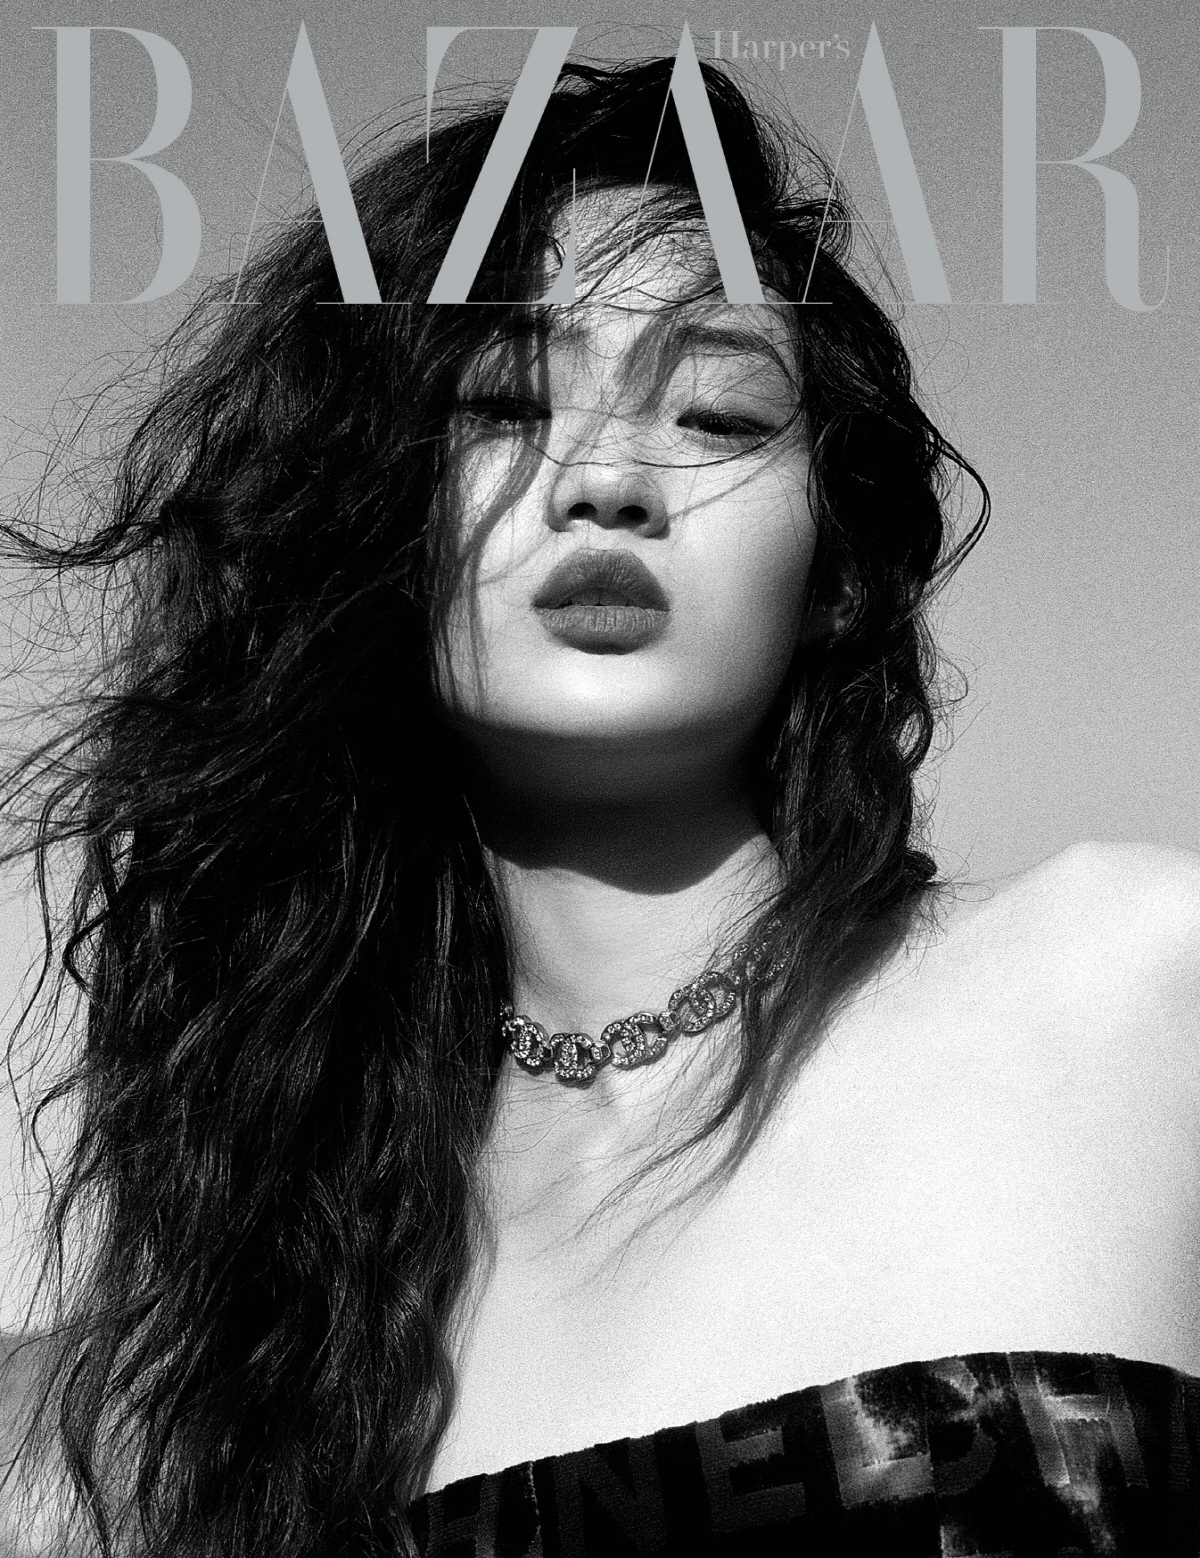 Fashion magazine Harpers Bazaar has released a fashion picture with top model Shin Hyunji.Last spring, the top model Shin Hyun-ji, who was in the finale of the 2020 F/W Chanel collection in Paris, France, and gathered topics with Asias first closing model, was the main character.It is a World Model that has a special relationship with Chanel House from Carl Lagerfeld to designer Virginia Biaar who leads Chanel now.She appeared as a cover girl in a newly released 2020 cruise collection.If Carl showed an overwhelming stage overflowing with imagination and creativity, now Chanel House, led by Virginia, showcases the style that contemporary women want and need.She has been a model since high school, and she has been mature and charismatic through this Bazaar cover shoot.Not only did it penetrate perfectly with vintage sensibility works that were shot only with film and polaroids, not digital!Im going to be the first to wear clothes Ill never wear in my life, and Ill be on the runway perfectly decorated, and I cant say all the joy of getting that spotlight.I think the power of fashion is similar, because it plays a role in representing and expressing the times and society. The fashion picture with Shin Hyunji and Chanel can be found in the November issue of Harpers Bazaar, website and Instagram.Meanwhile, Shin Hyun-ji, who was born in 1996, won the on-style Challenge Super Model Korea season 4 in 2013.He also attracted attention by boasting friendships with Song Hye-kyo, who surpassed the age of 15.